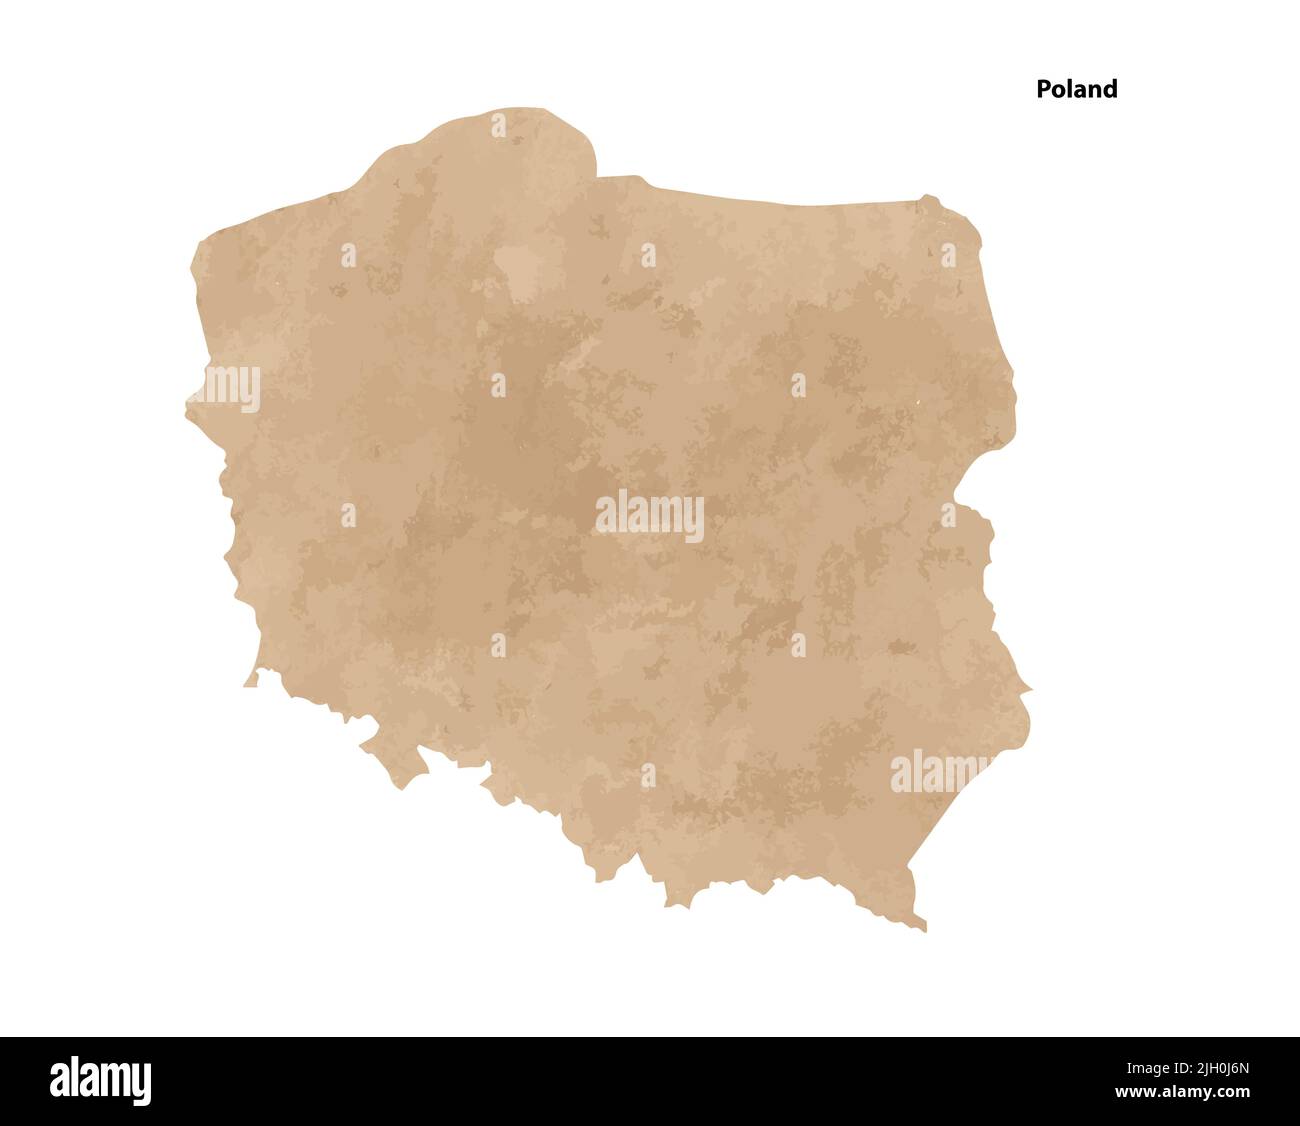 Old vintage paper textured map of Poland Country - Vector illustration Stock Vector